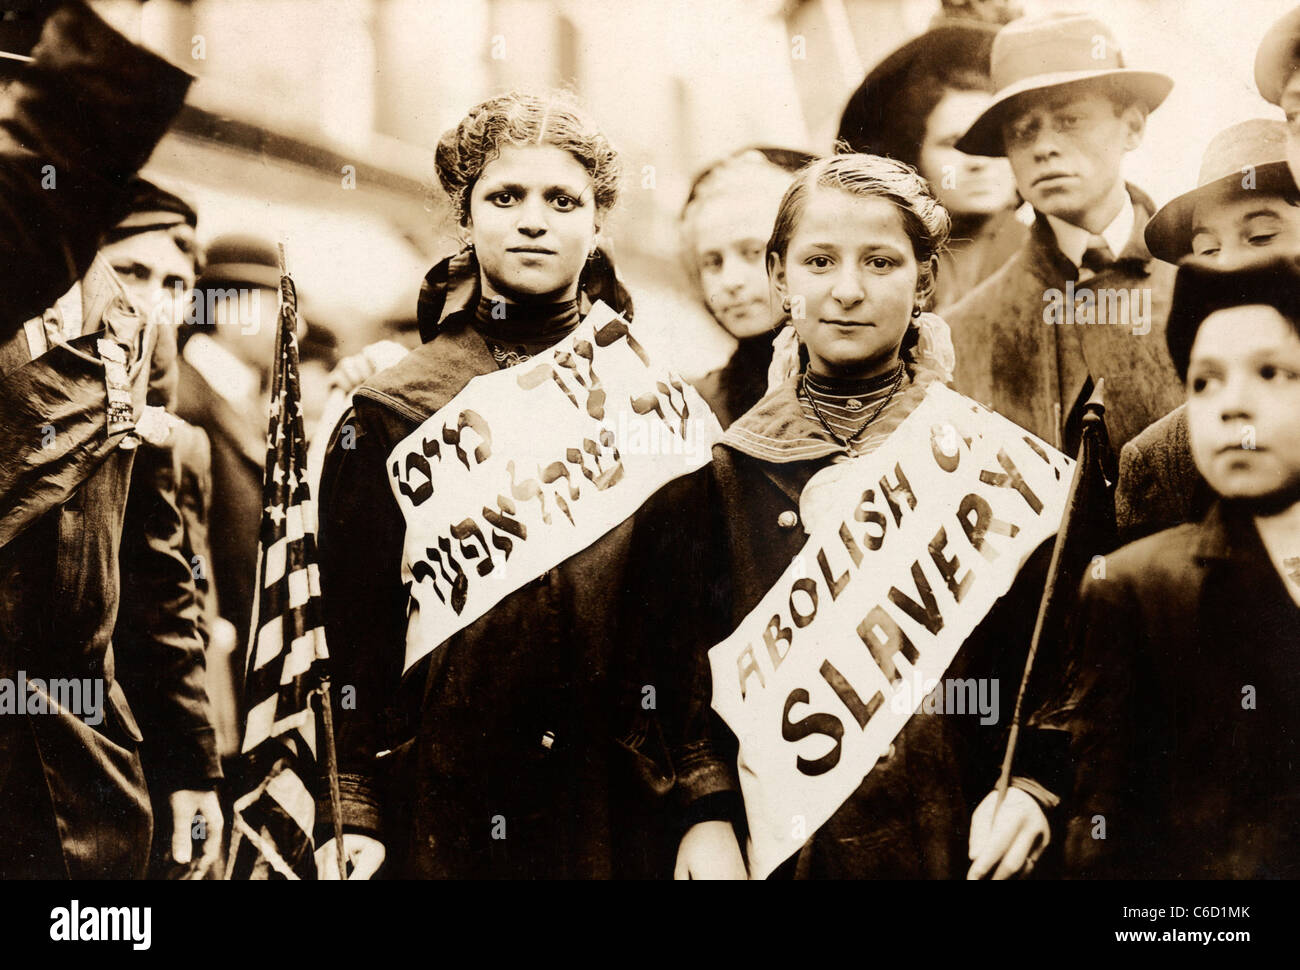 Protest against child labor in a labor parade in New York City, May 1, 1909 Stock Photo